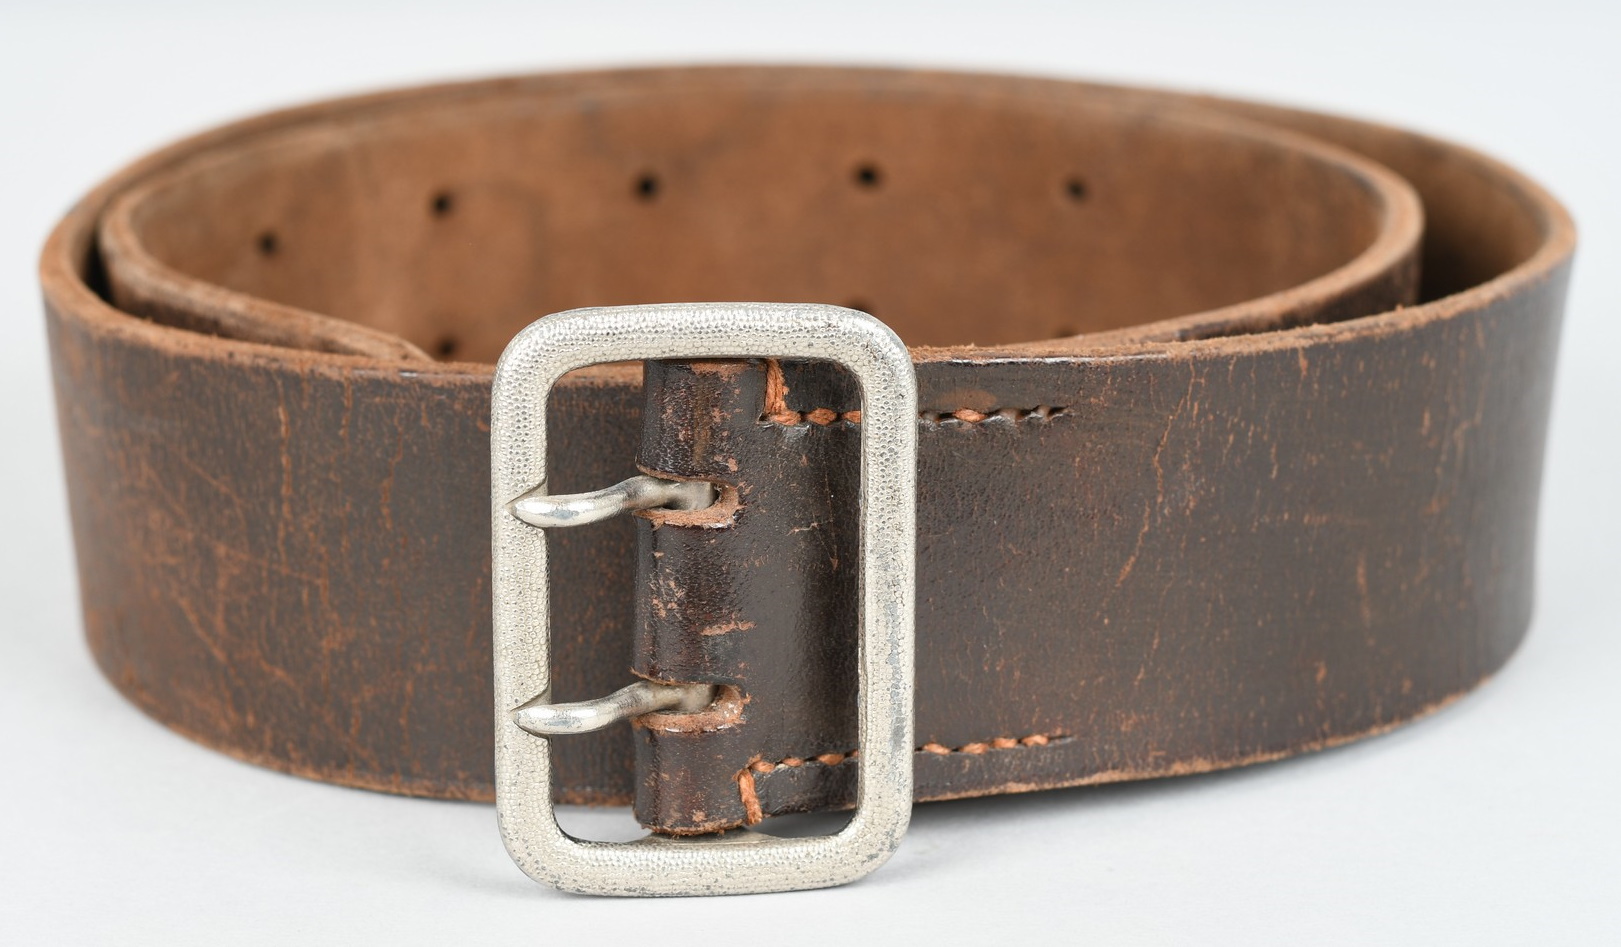 NSDAP/Political Leader's Belt And Open Claw Buckle